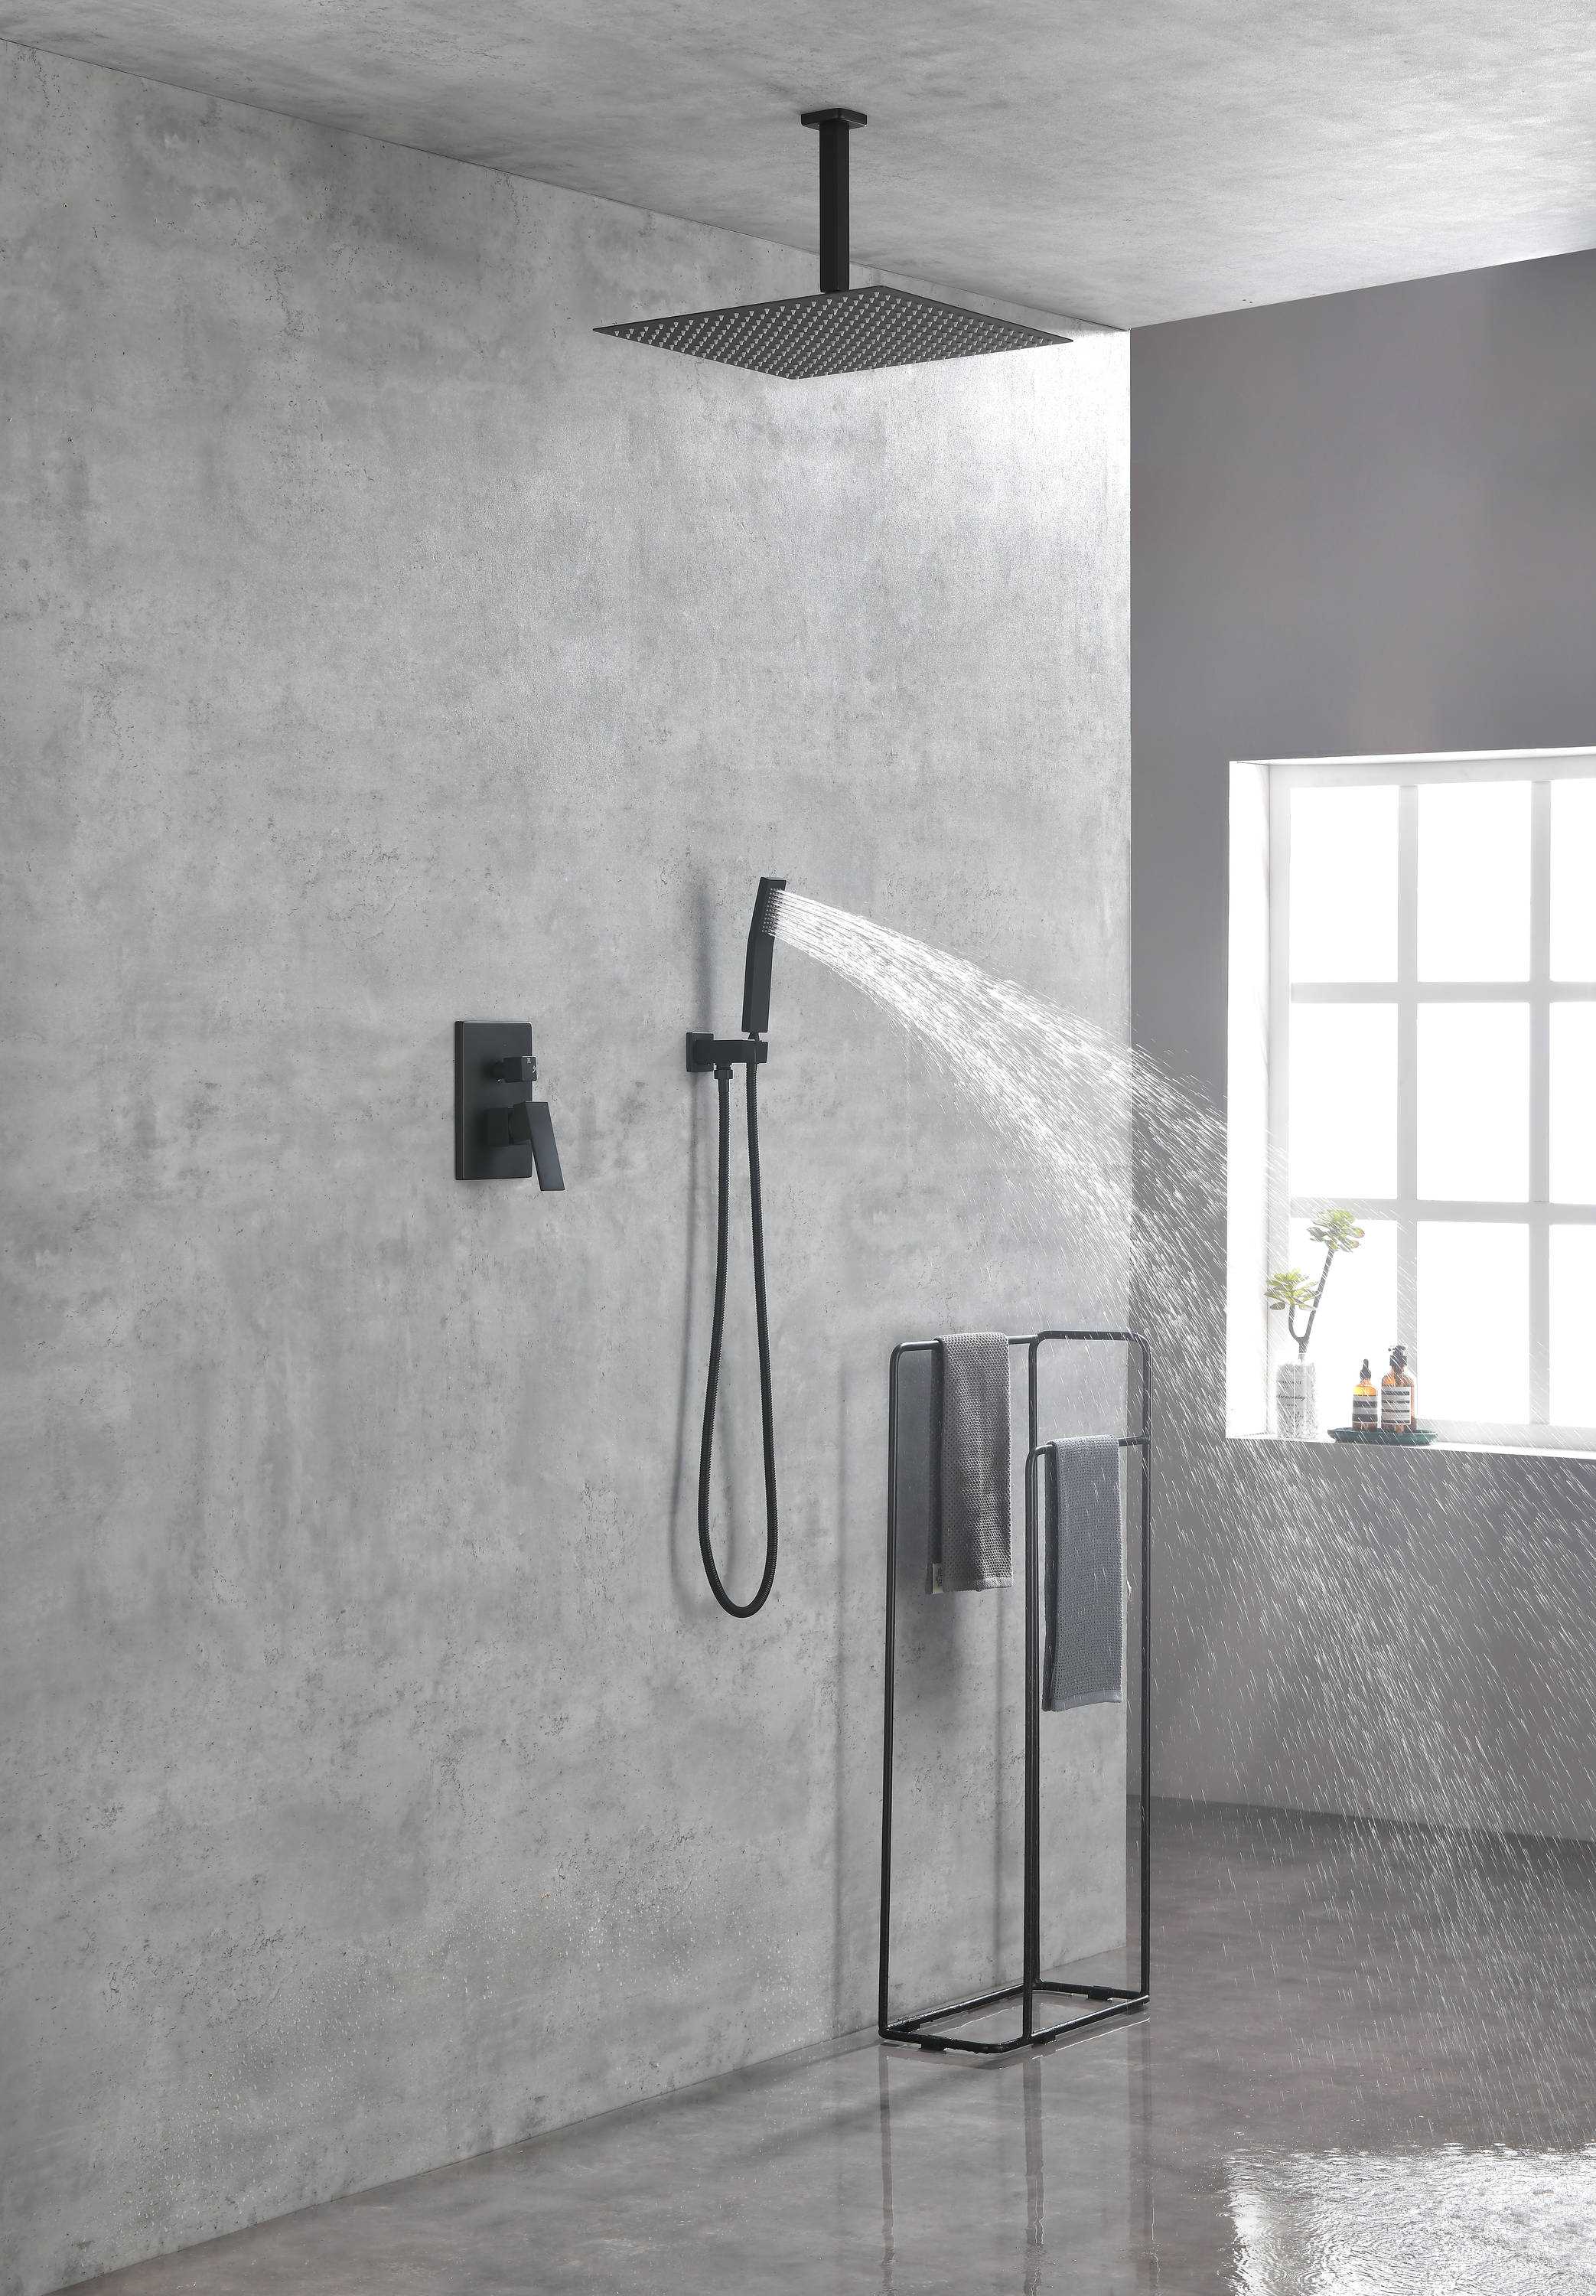 WELLFOR 16-in Ceiling Mounted Shower System Matte Black Built-In Shower  Faucet System with 2-way Diverter Valve Included